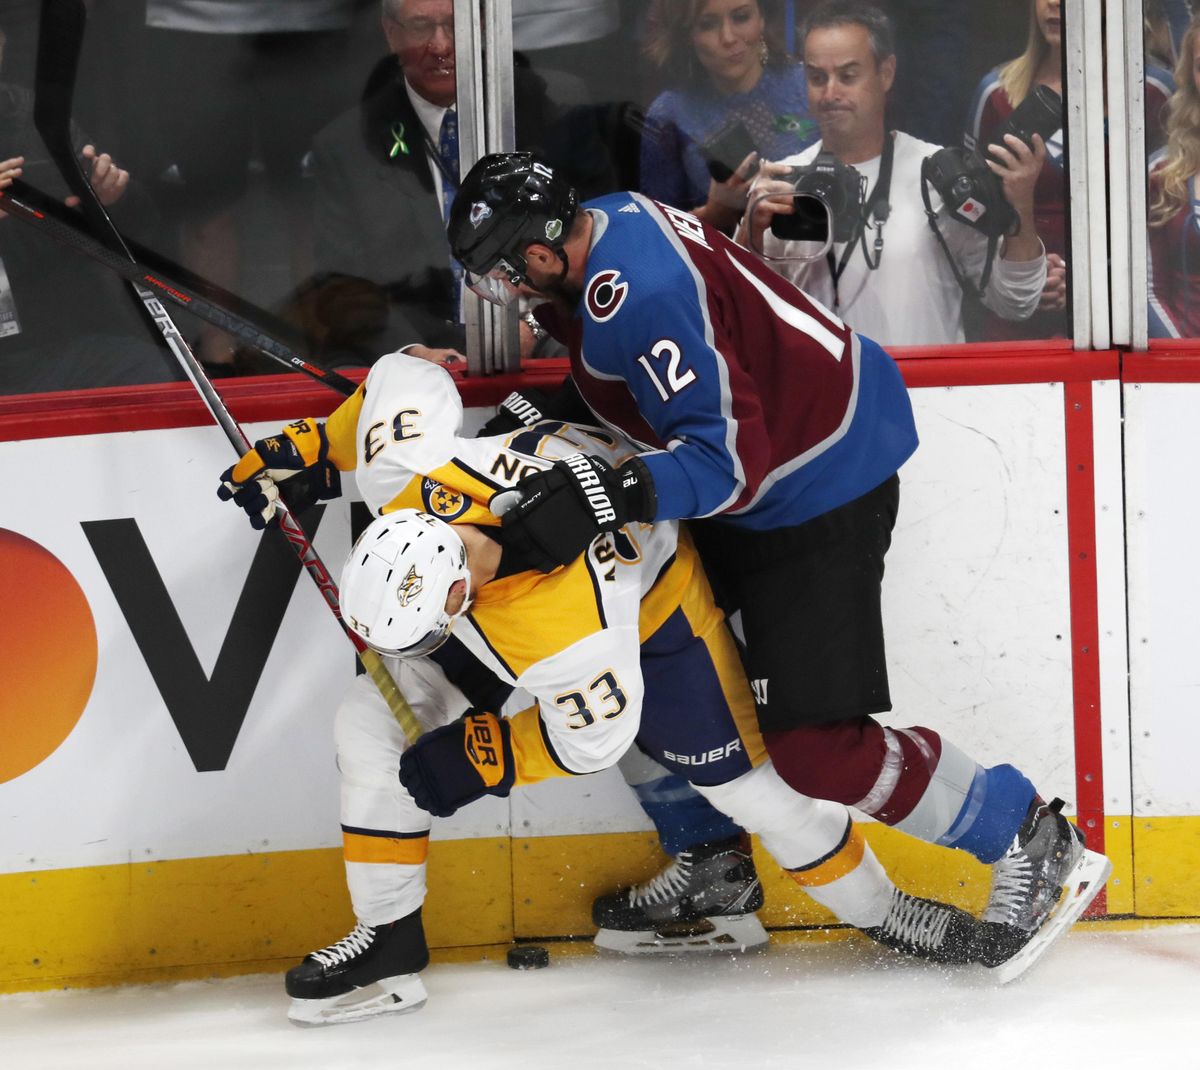 Colorado Avalanche defenseman Patrik Nemeth, hits Nashville Predators left wing Viktor Arvidsson as he tries to control the puck in the first period of Game 3 of an NHL hockey first-round playoff series Monday, April 16, 2018, in Denver. (David Zalubowski / Associated Press)